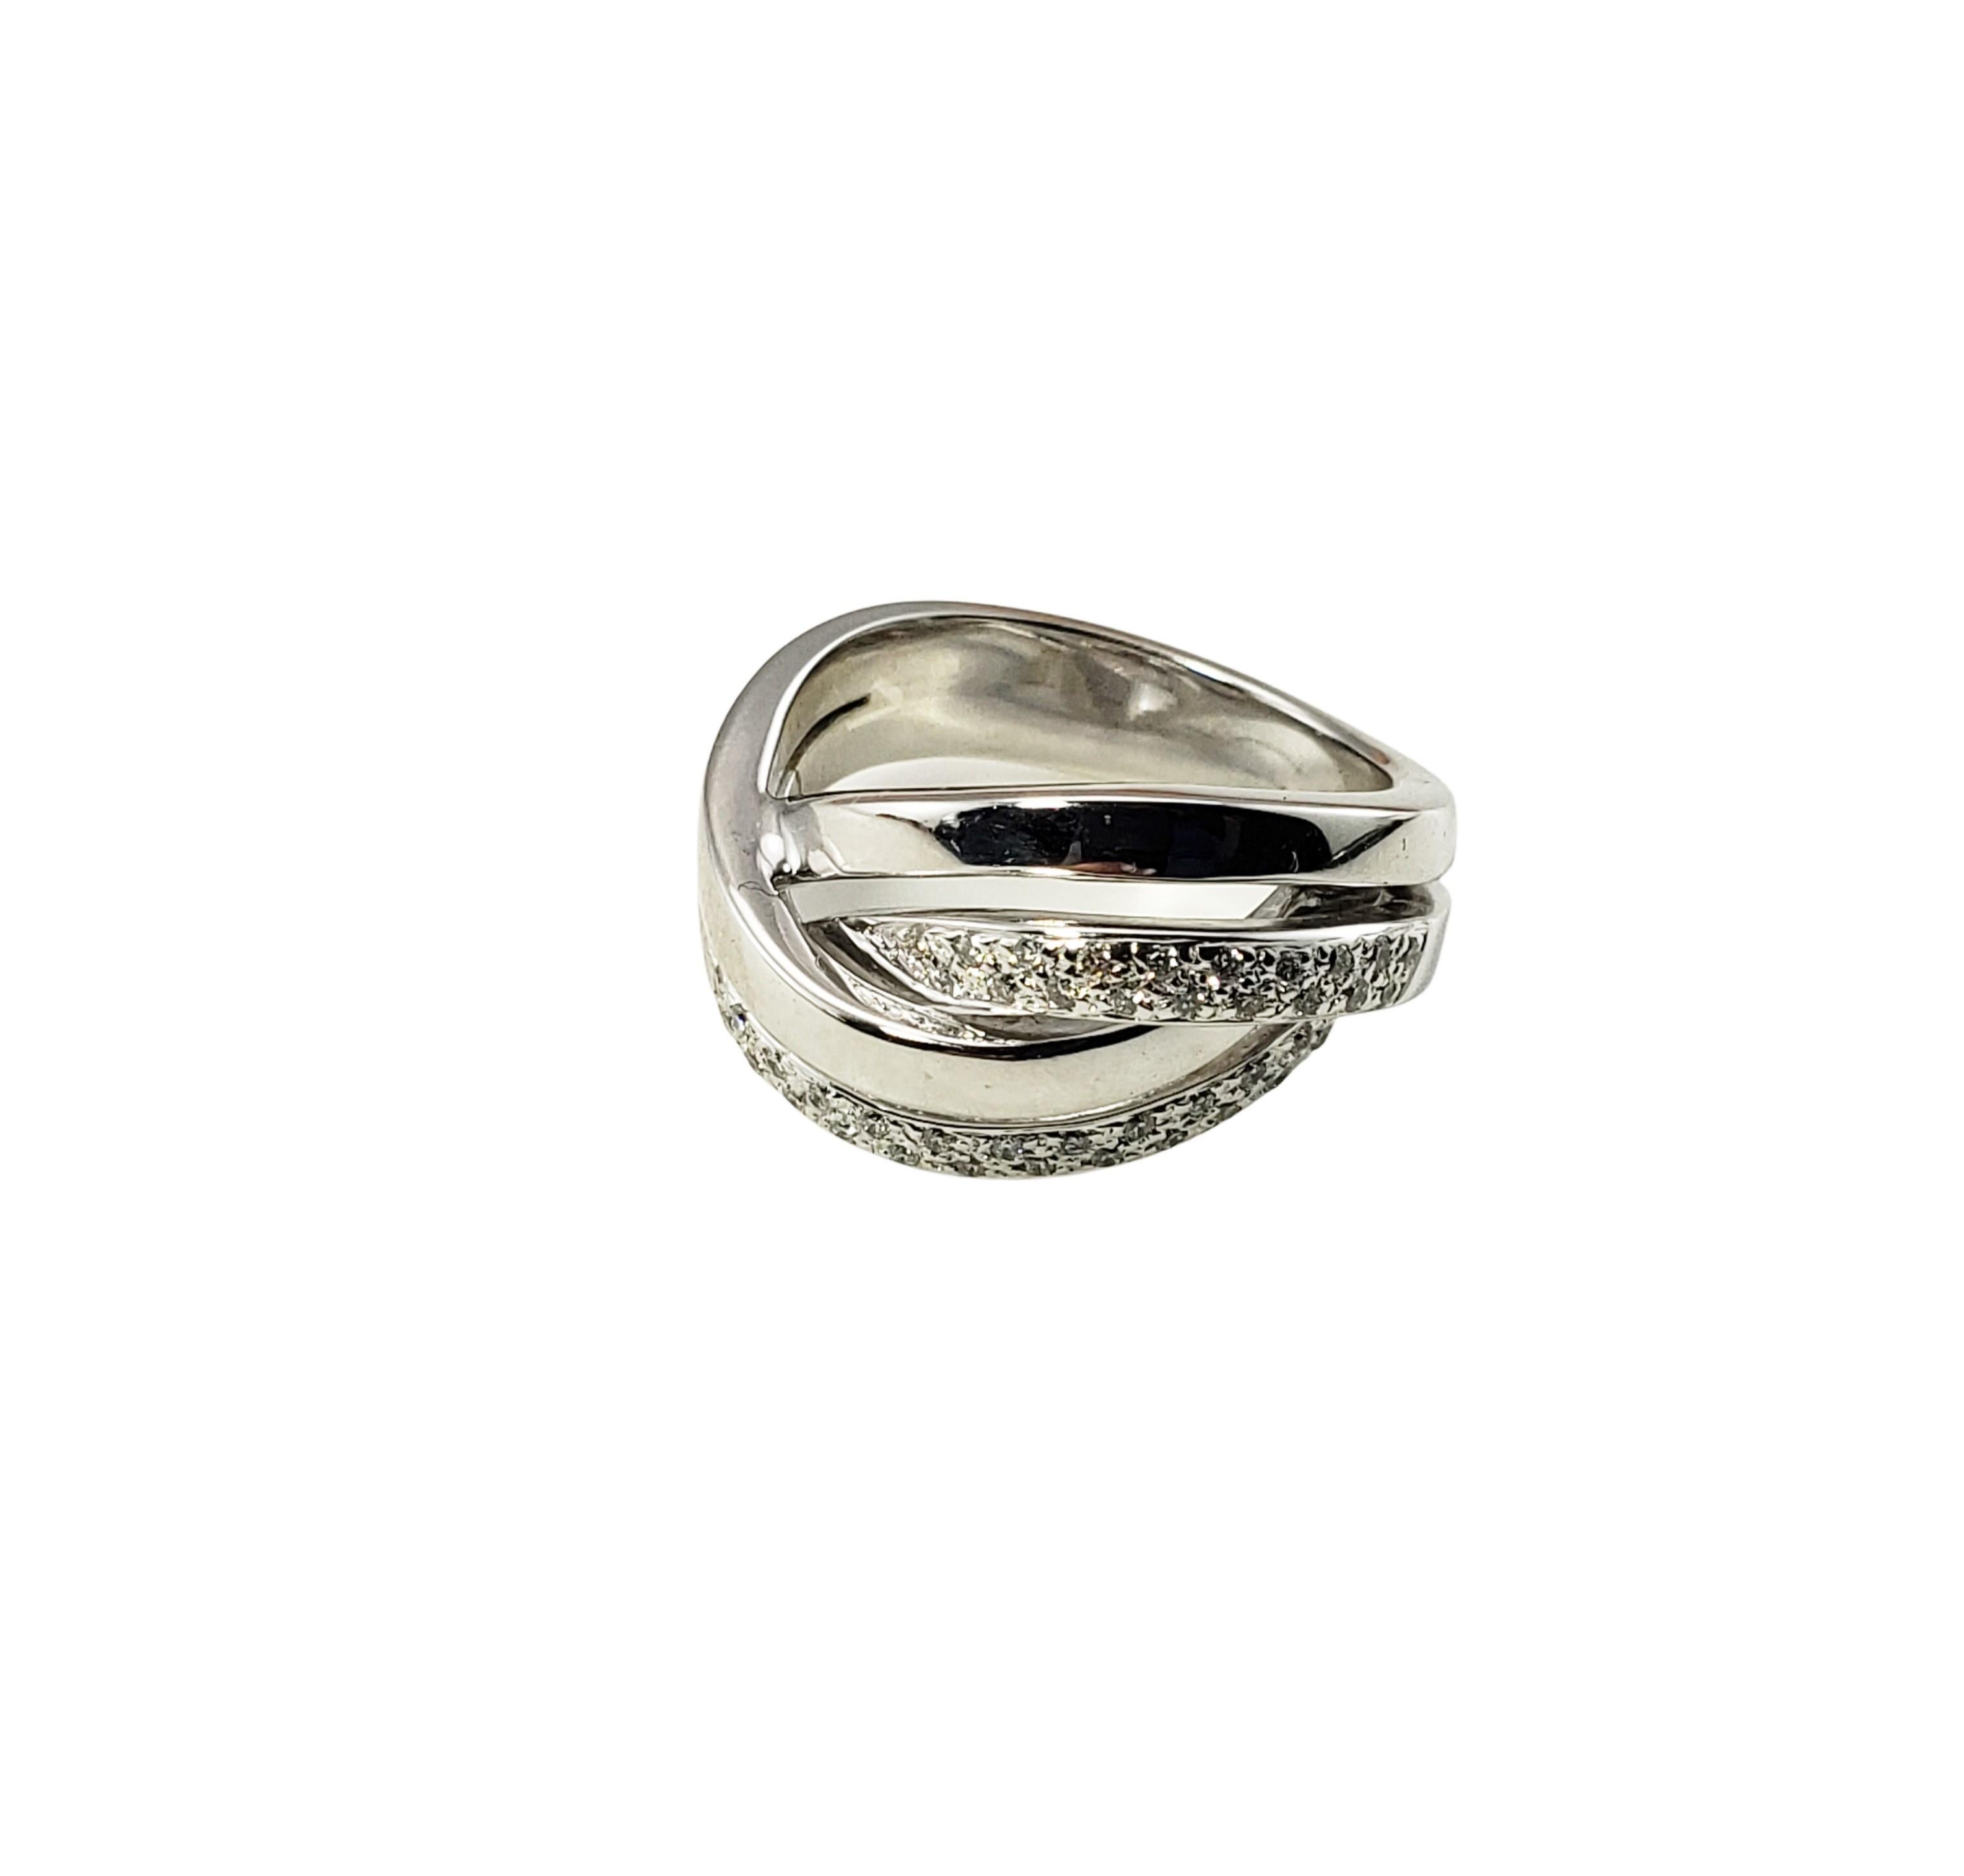 14 Karat White Gold and Diamond Band Ring Size 7.25

This sparkling band features 43 round brilliant cut diamonds set in beautifully detailed 14K white gold.  Width:  12 mm.  Shank:  5 mm.

Approximate total diamond weight:  .25 ct.

Diamond color: